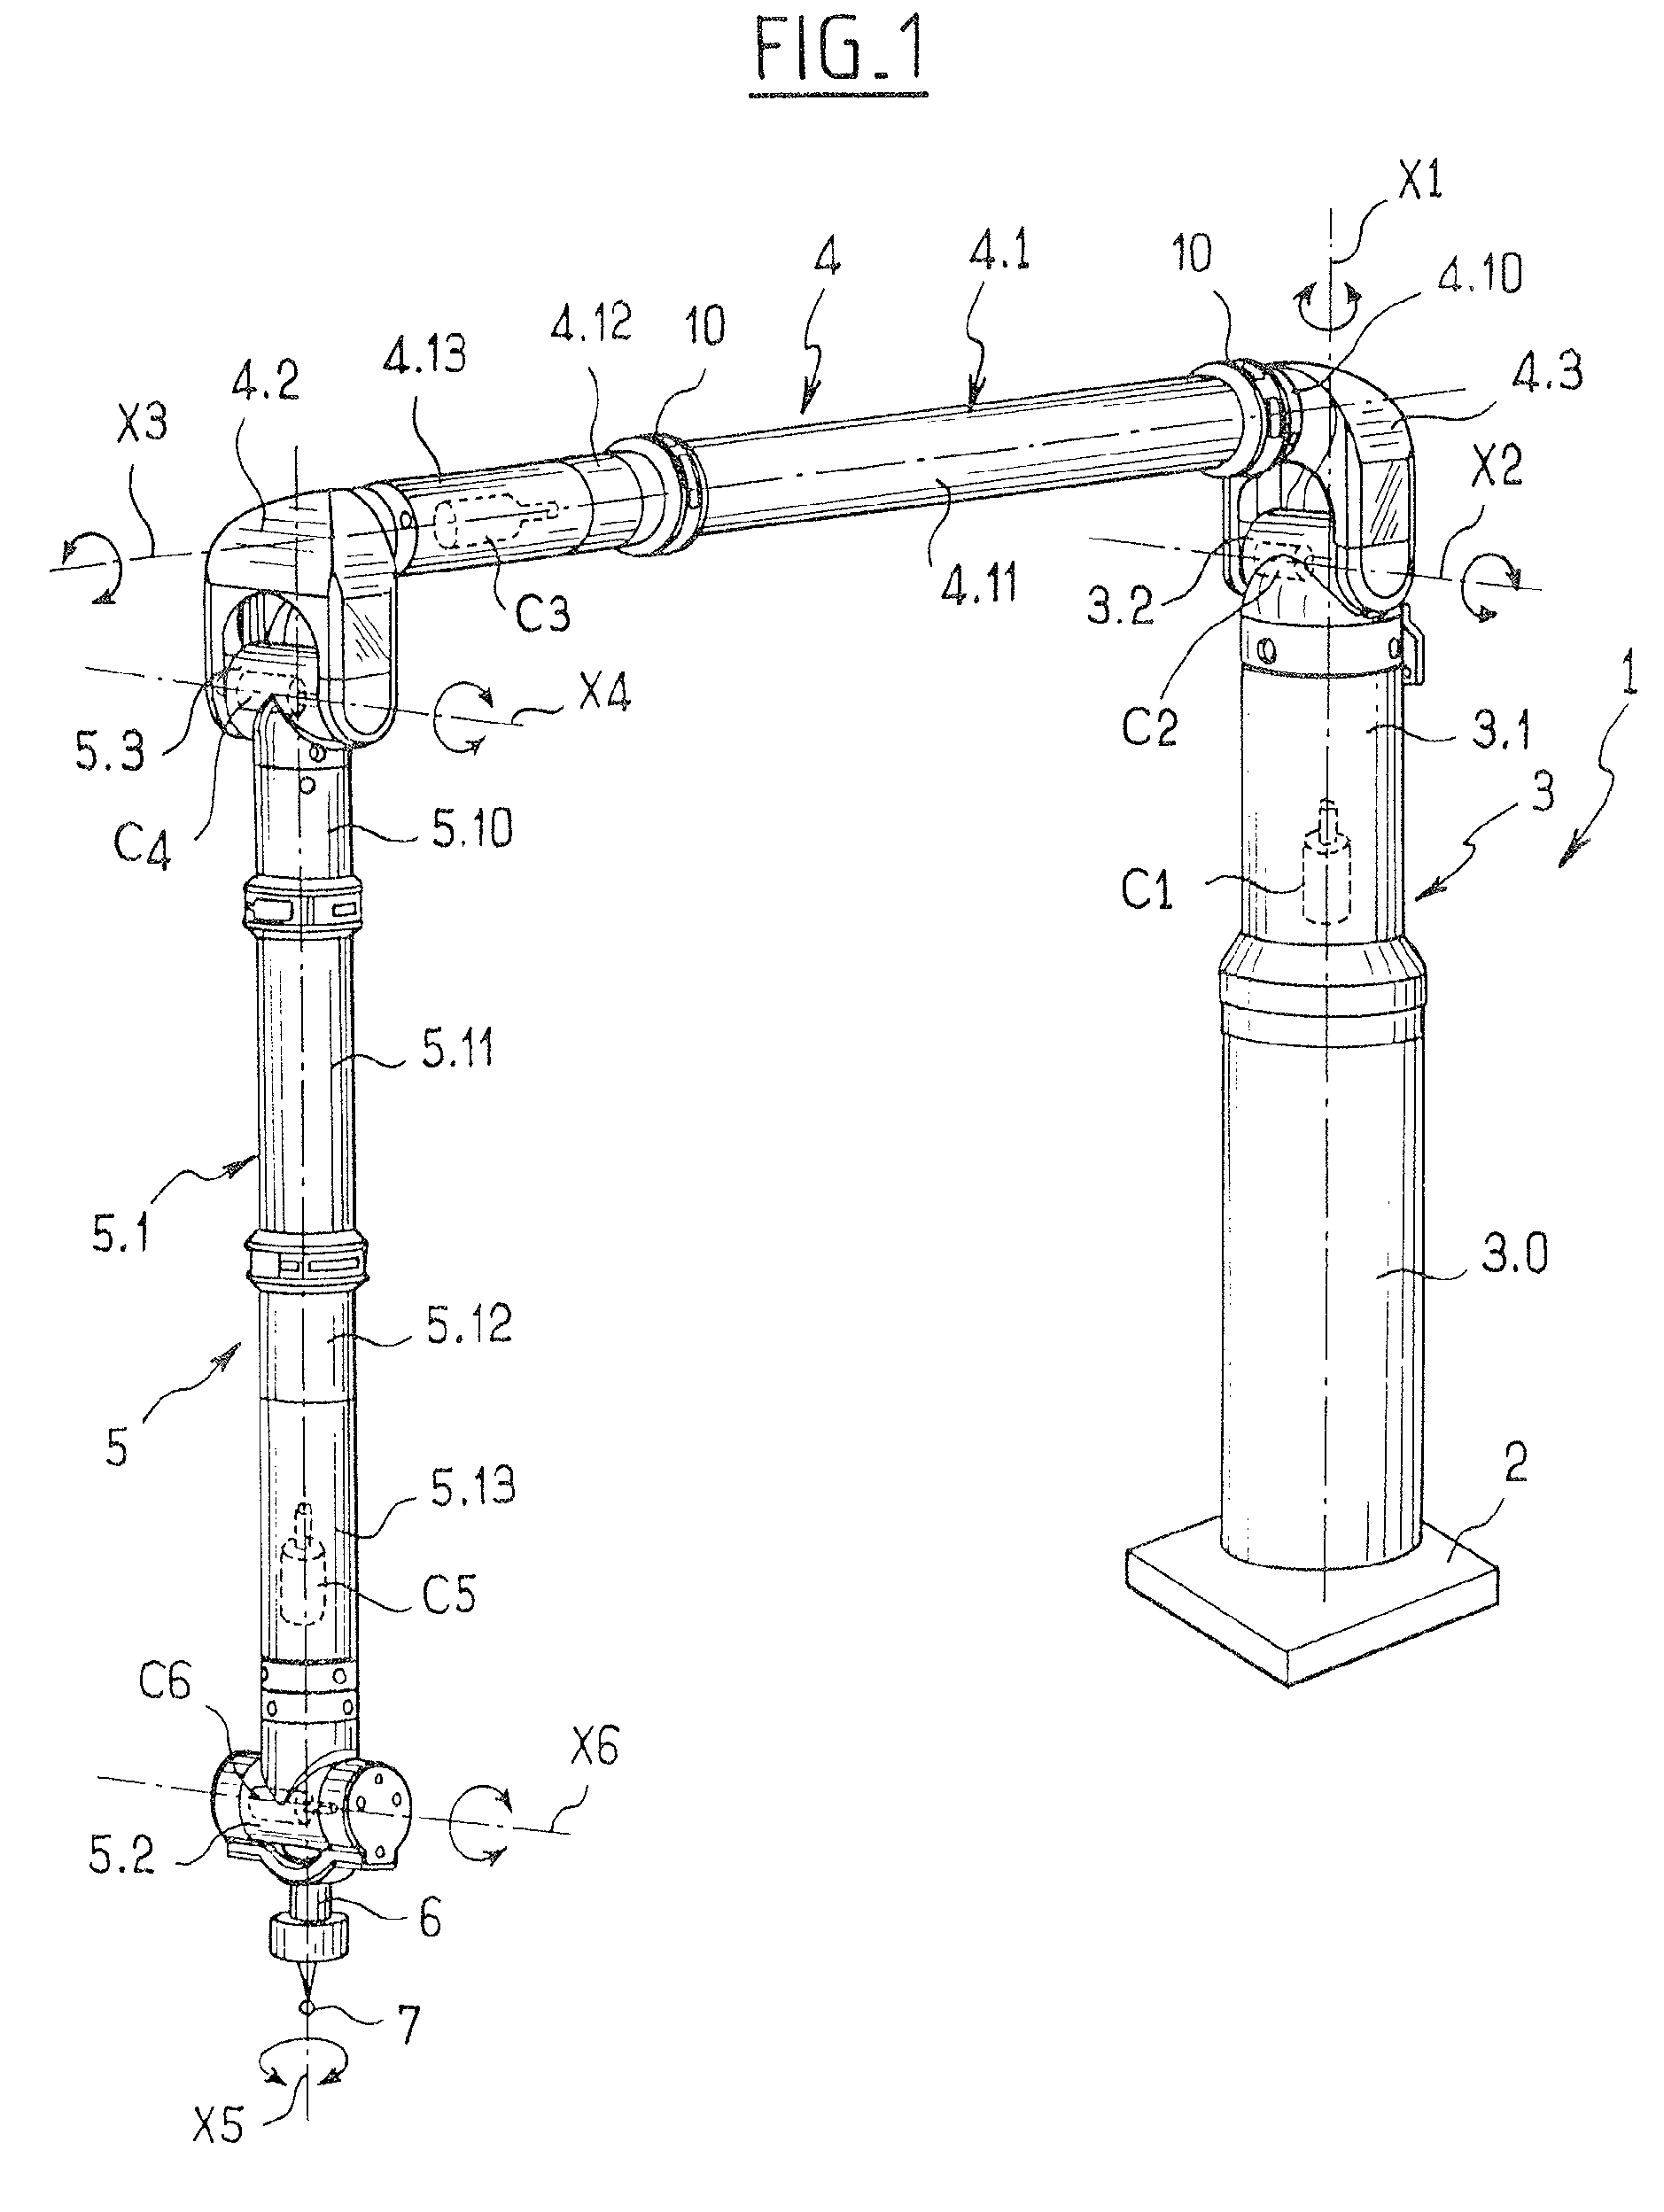 Articulated-arm three-dimensional measurement apparatus having a plurality of articulated axes